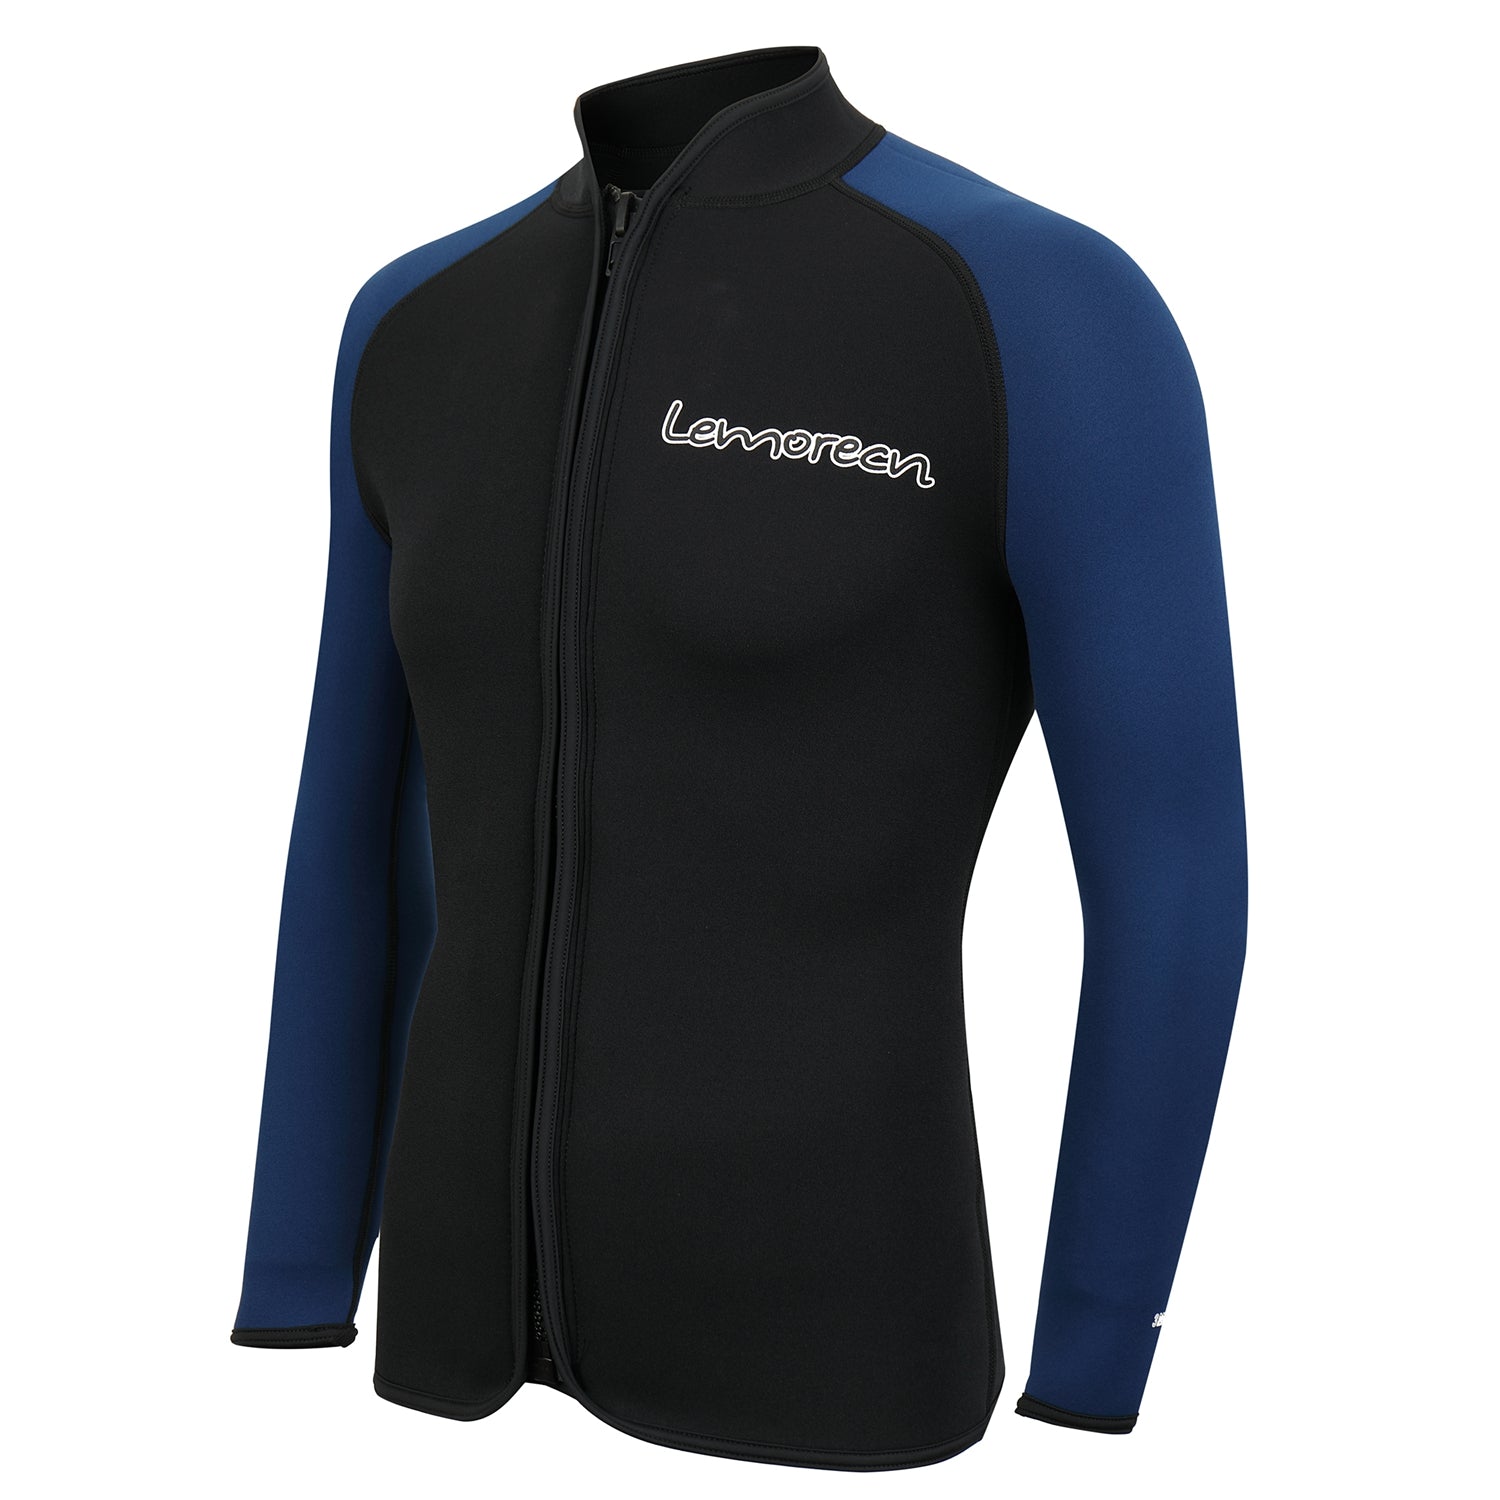 Sbart 3mm Neoprene Wetsuit For Swimming Men Long Sleeve Warm Spearfishing  Wetsuits Top Coat For Diving Kitesurfing Jacket Size - Wetsuits - AliExpress